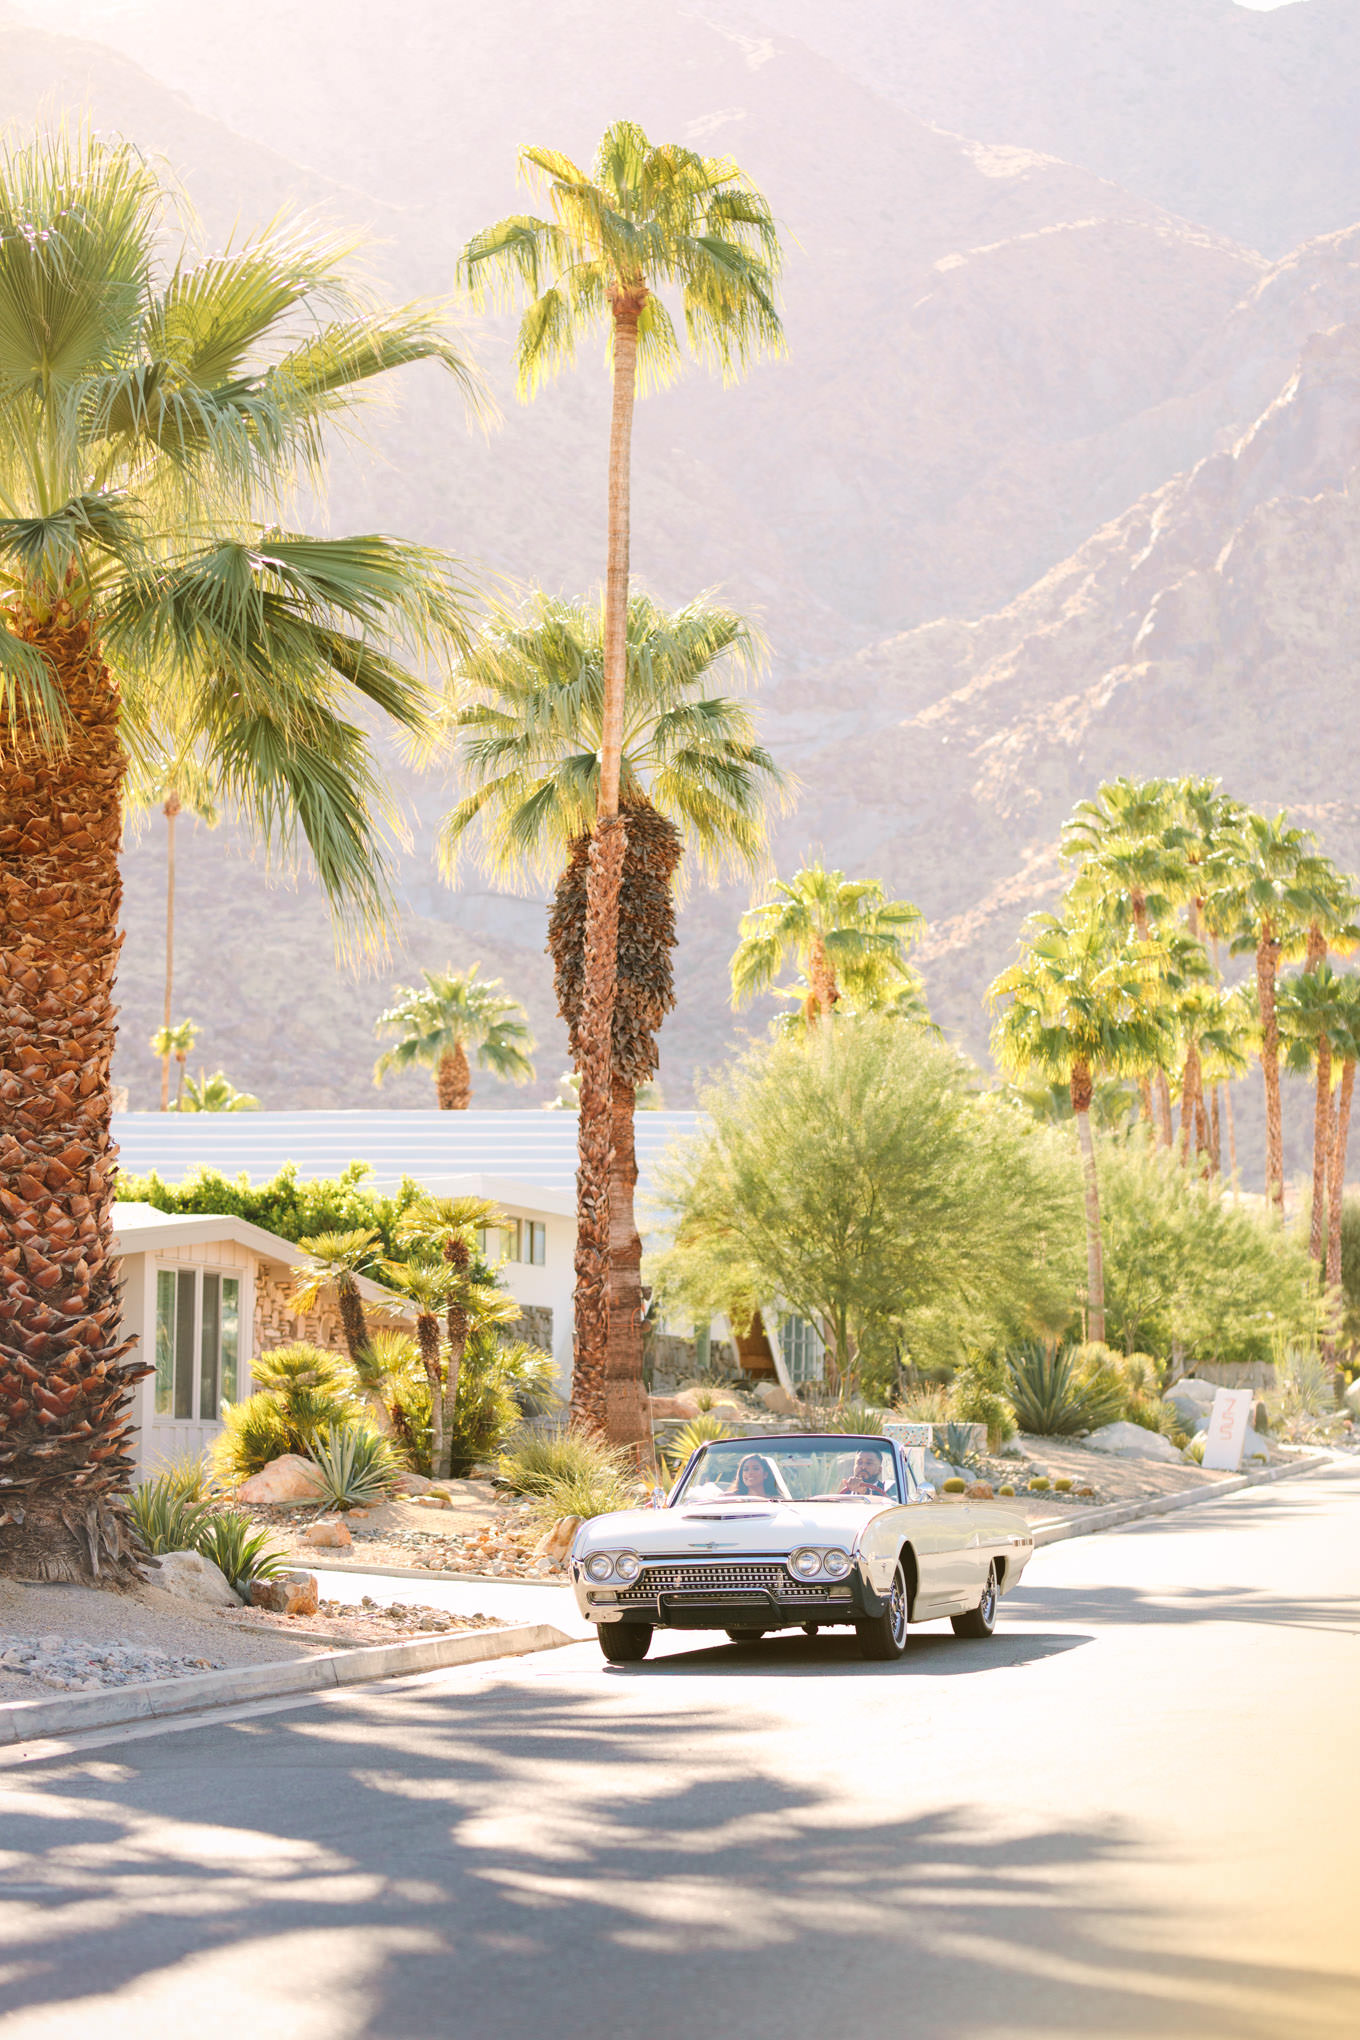 Bride and groom driving classic car during Palm Springs elopement | Engagement, elopement, and wedding photography roundup of Mary Costa’s favorite images from 2020 | Colorful and elevated photography for fun-loving couples in Southern California | #2020wedding #elopement #weddingphoto #weddingphotography #microwedding   Source: Mary Costa Photography | Los Angeles